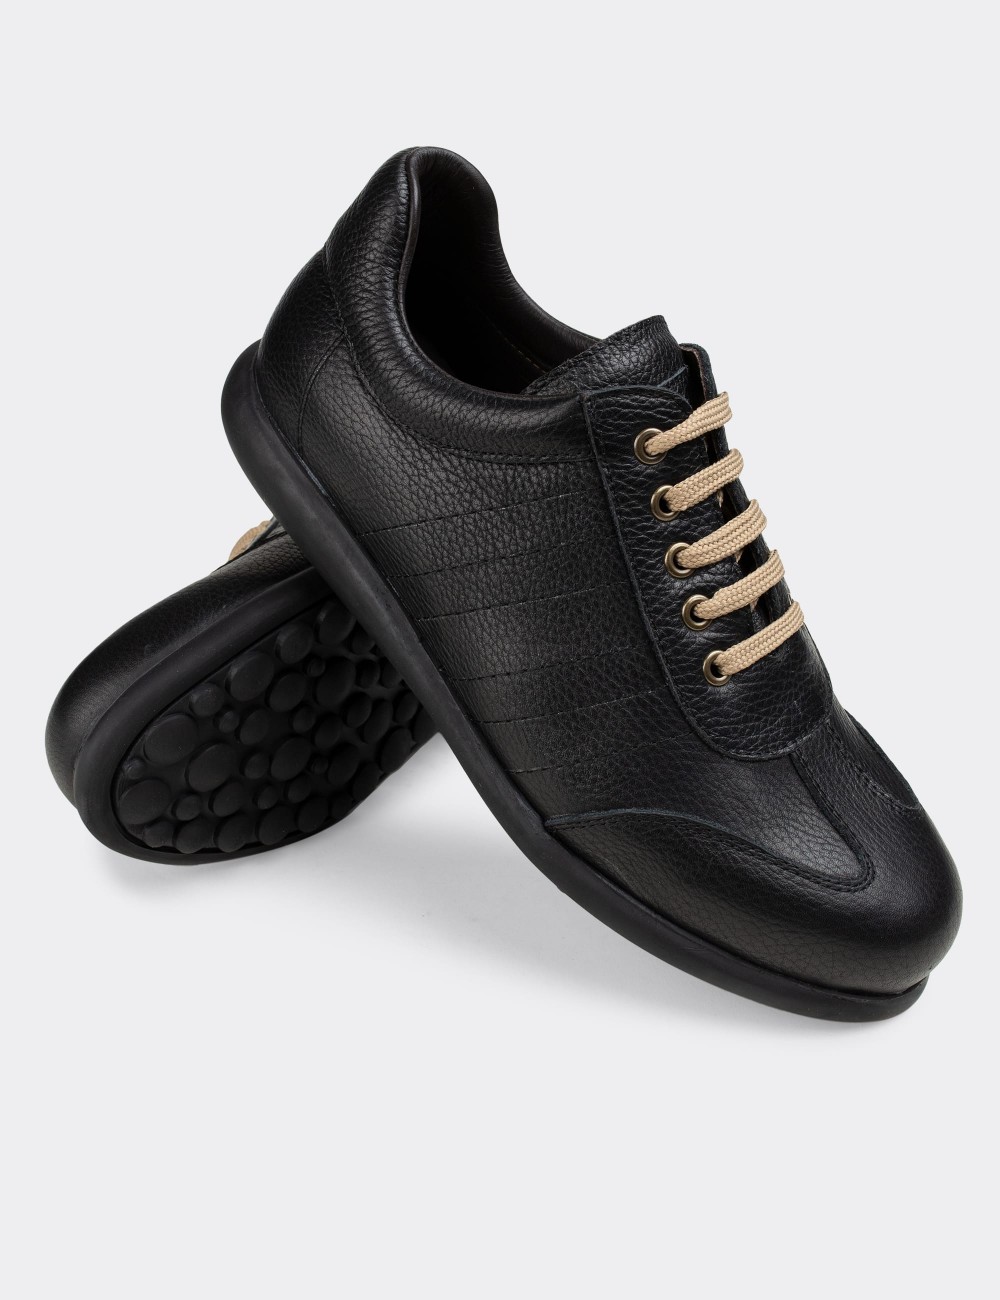 Black  Leather Lace-up Shoes - 01826MSYHC03